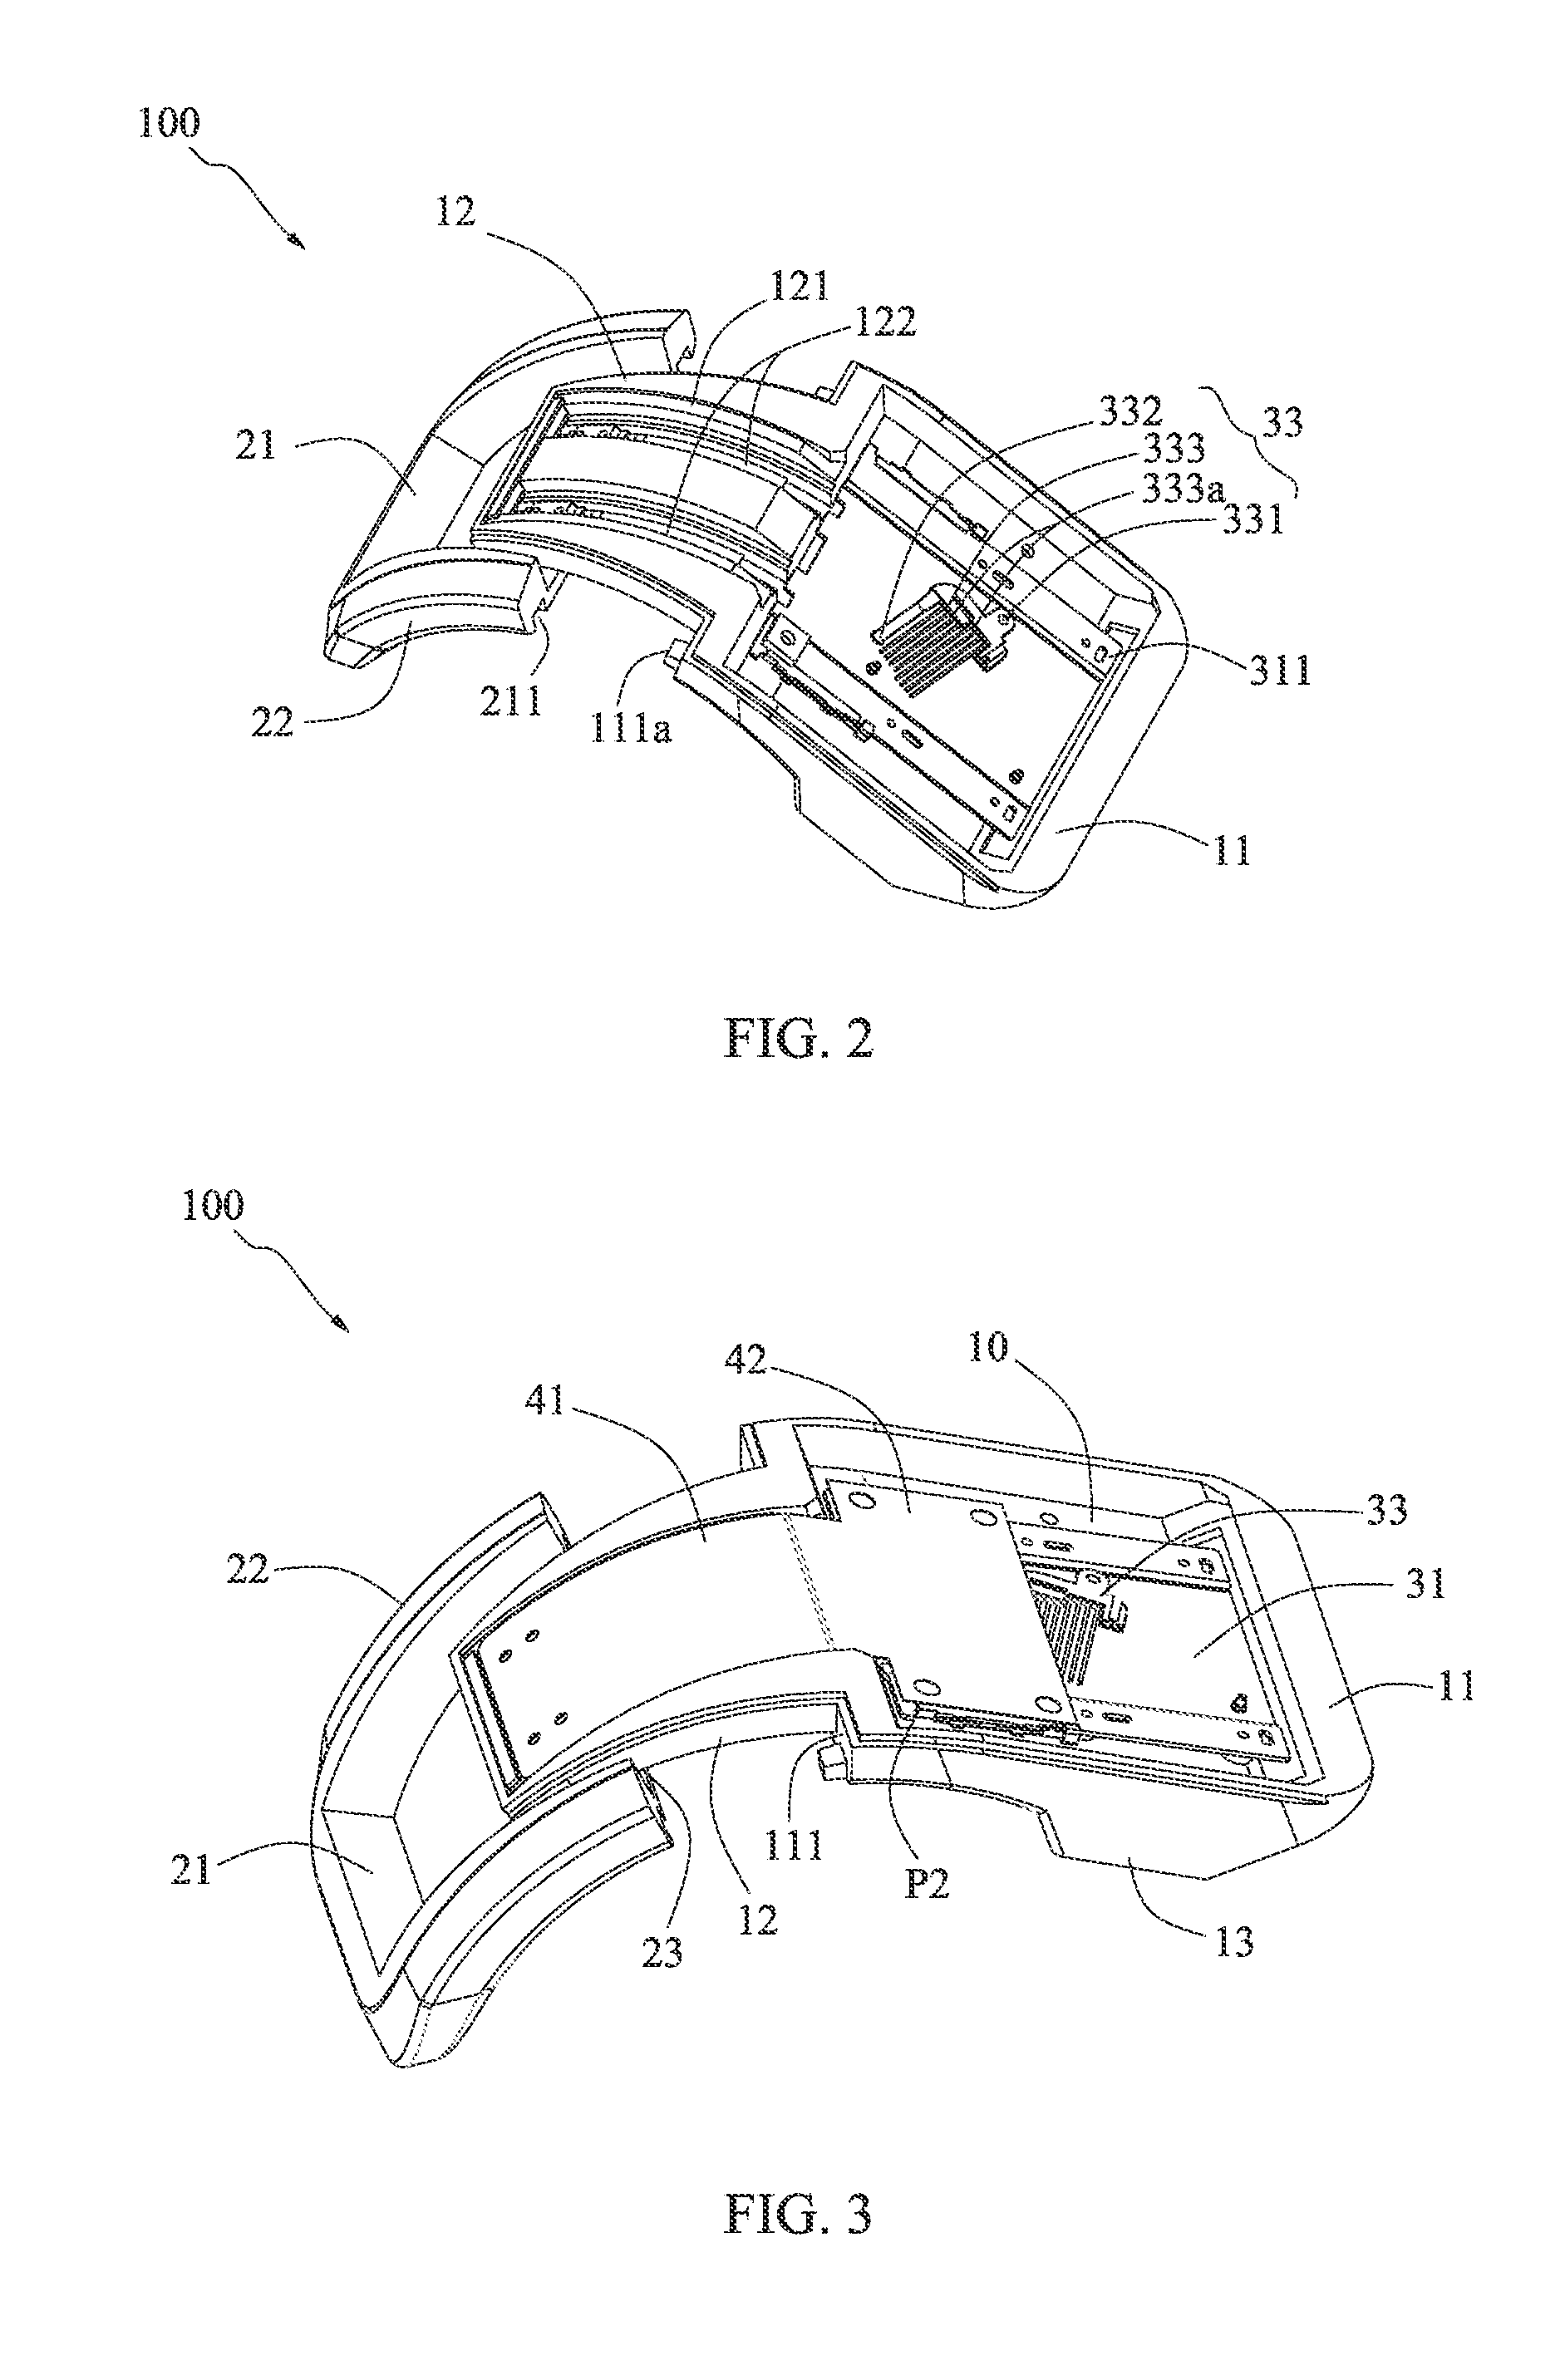 Mouse structure with retracting function